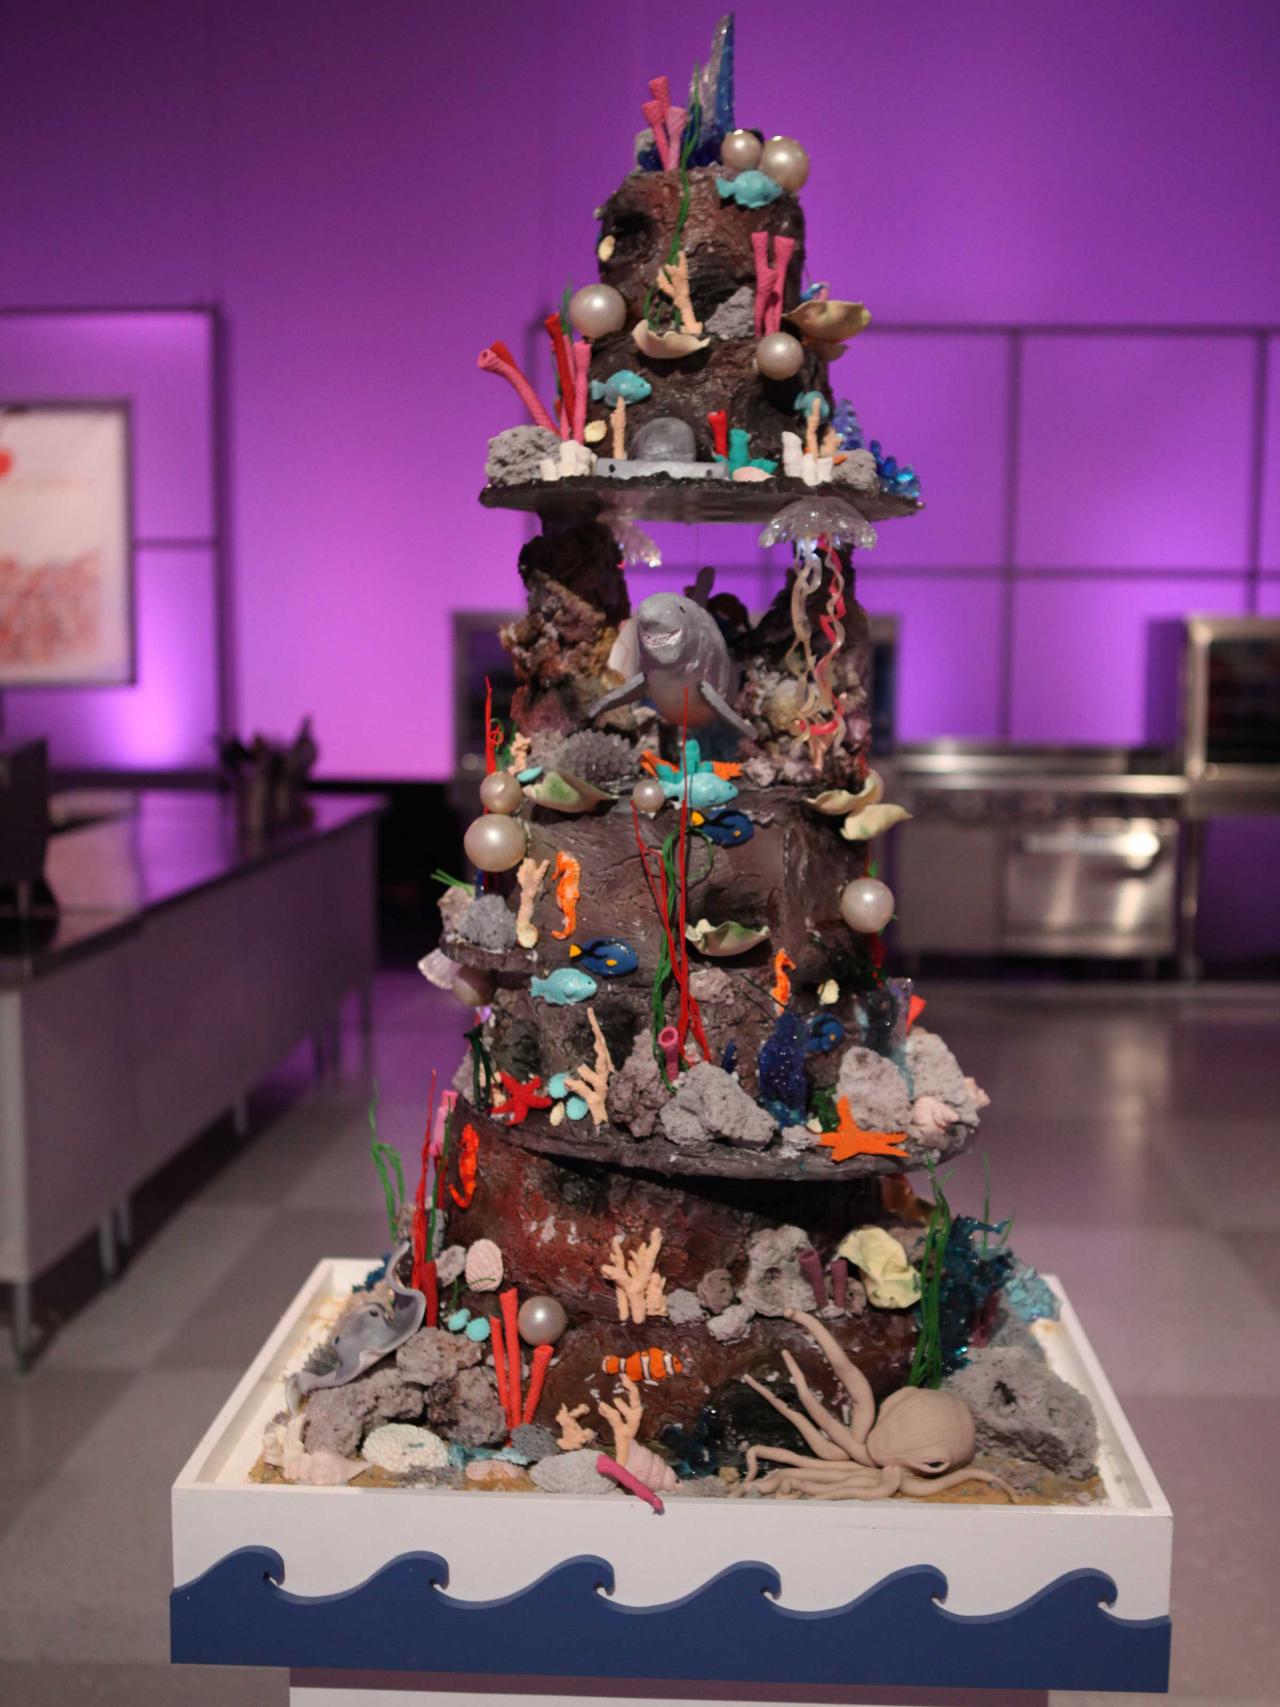 Our latest cake, A Las Vegas 3 tier... - Cake Expectations | Facebook